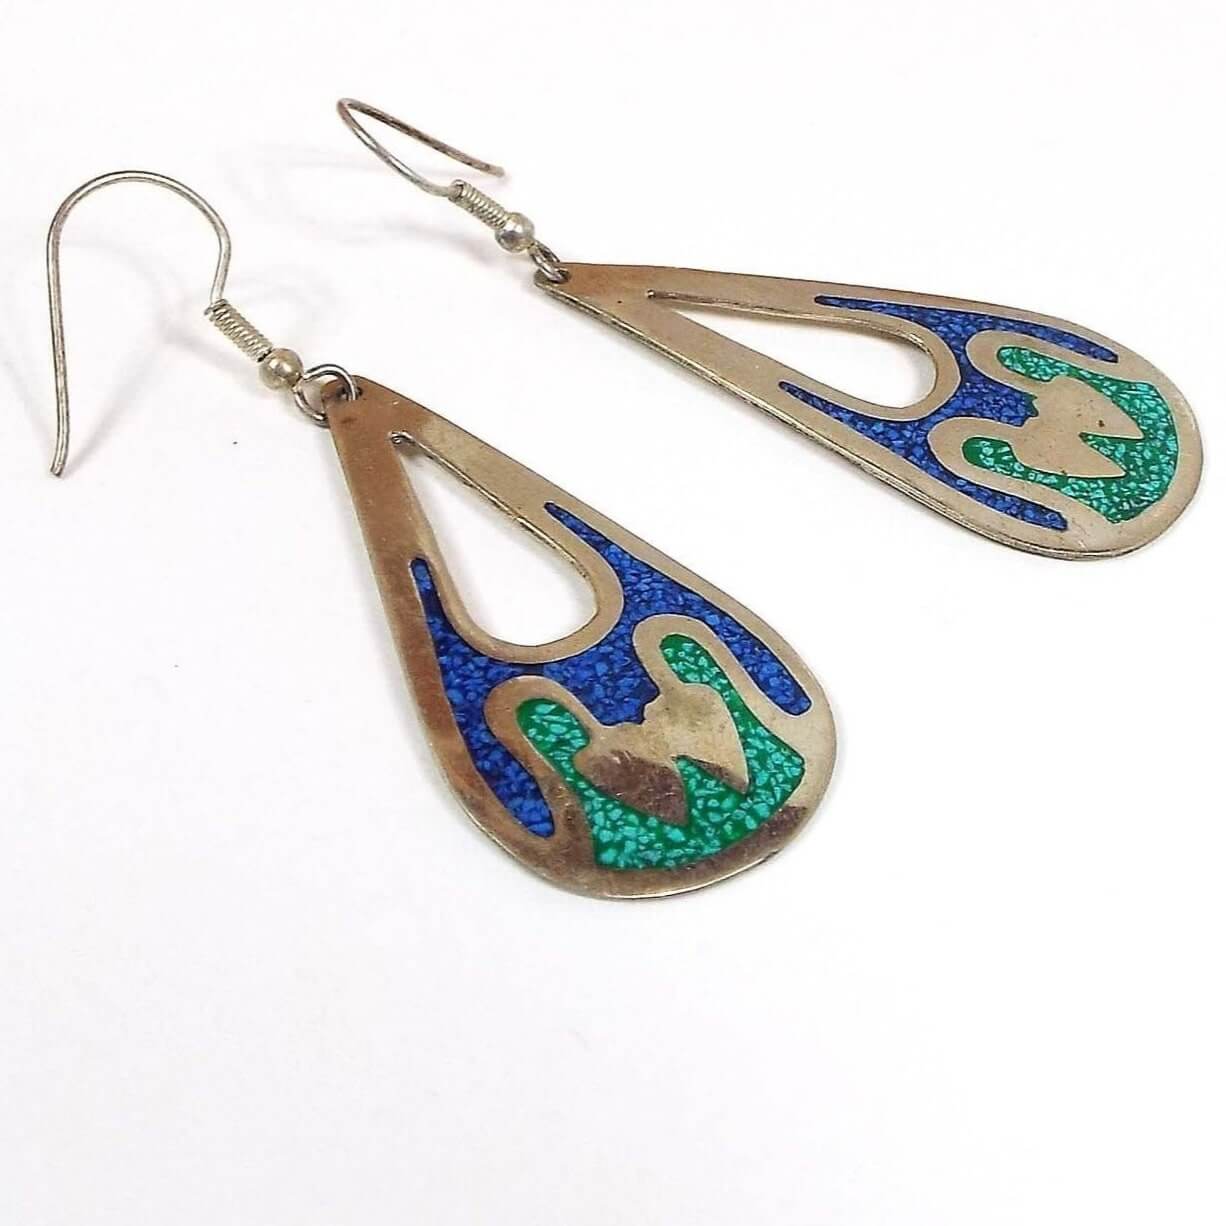 Front view of the Alpaca earrings are teardrop shaped with smaller tear drop cut outs at the top part of the earrings. There are two wavy areas of resin at the bottom. Each part has tiny stone chips inlaid in the resin. The top part is blue and the bottom part is green. The metal on the earrings is silver in color and they have curved wire fish hook style ear wires at the top.